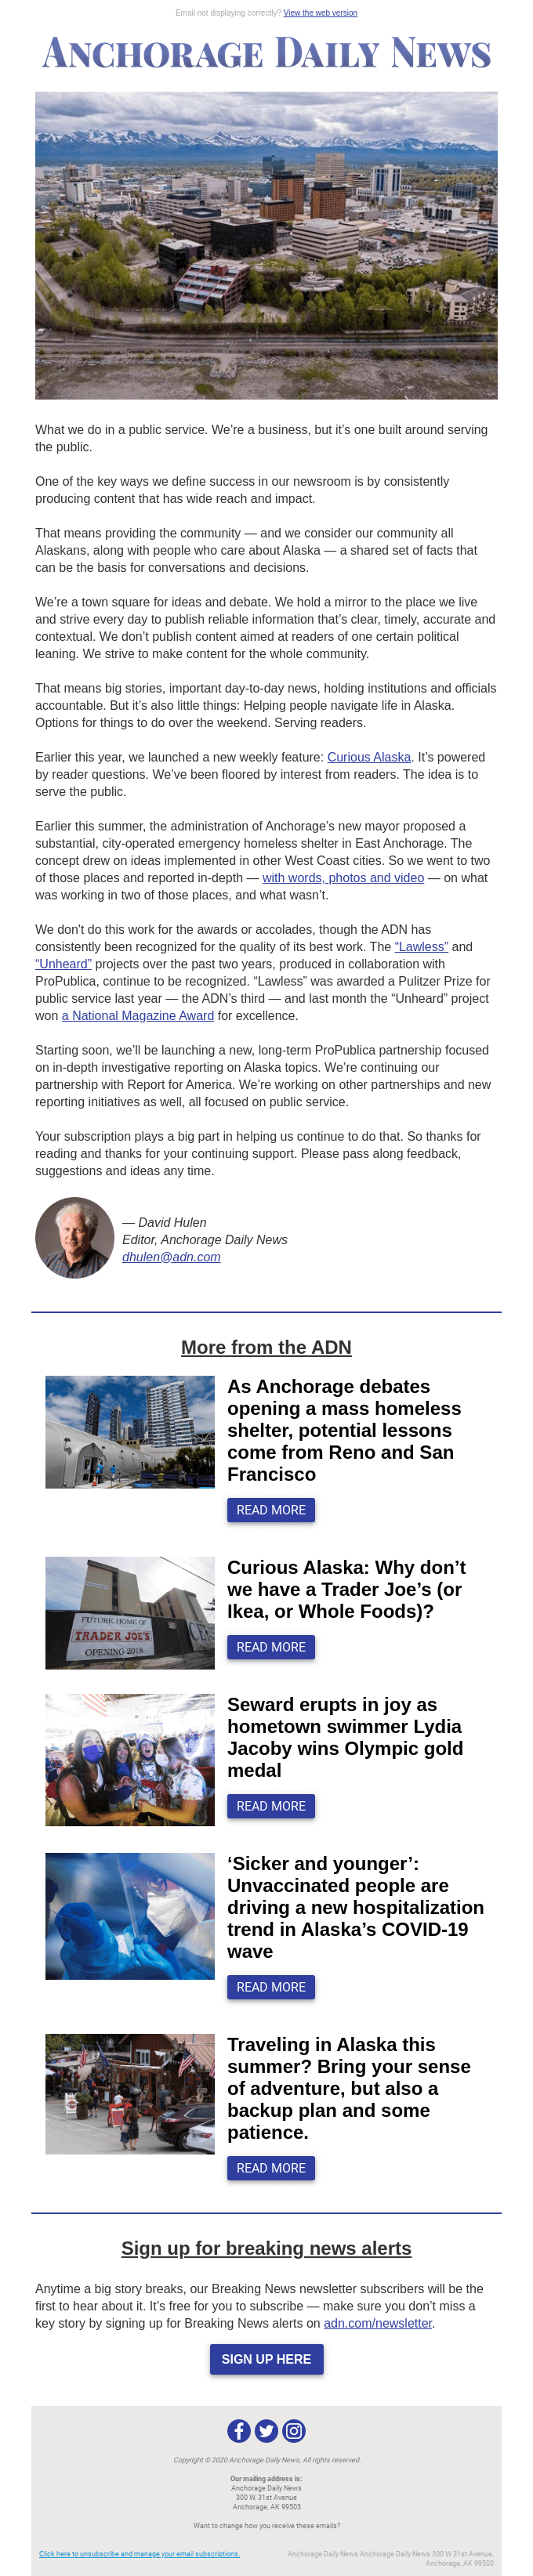 Letter from the Editor: The ADN is a public service. Here's how we serve our readers and the whole community.